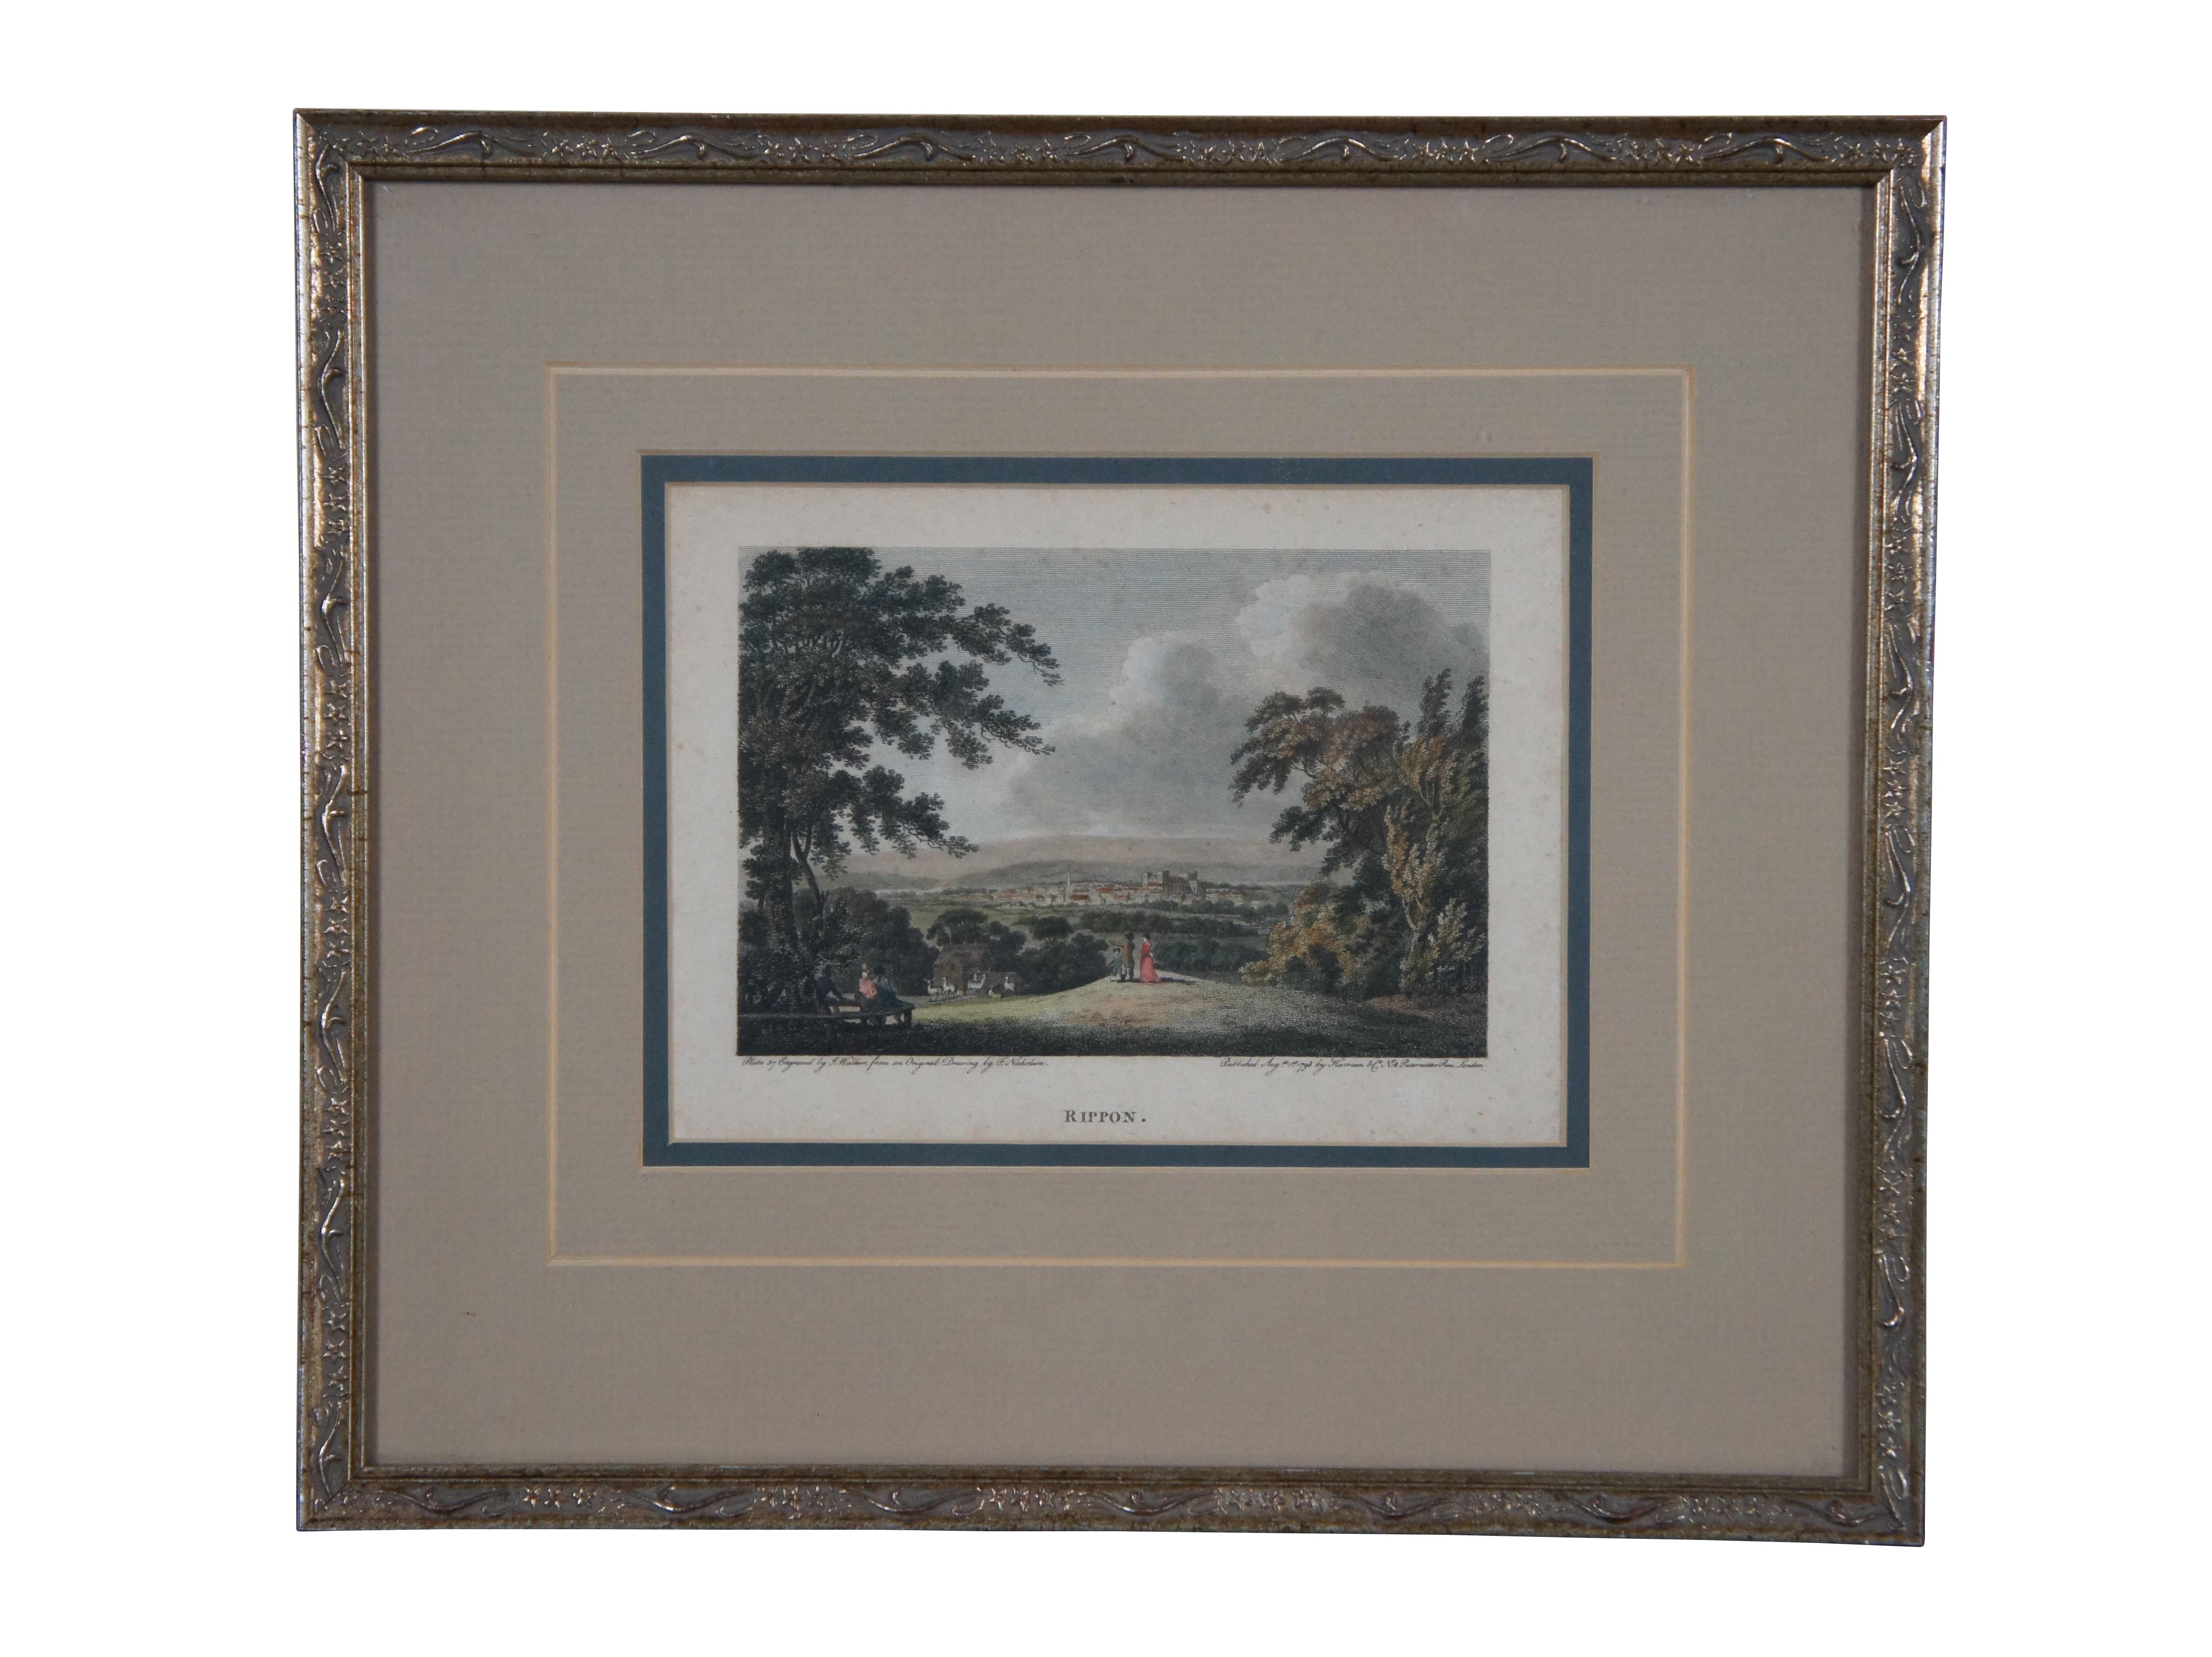 Pair of framed 18th century hand colored landscape engravings. One portraying Rippon – Plate 37 Engraved by J. Walker from an Original Drawing by F. Nicholson / Published August 1st 1793 by Harrison & Co N.18 Paternoster Row, London. The other